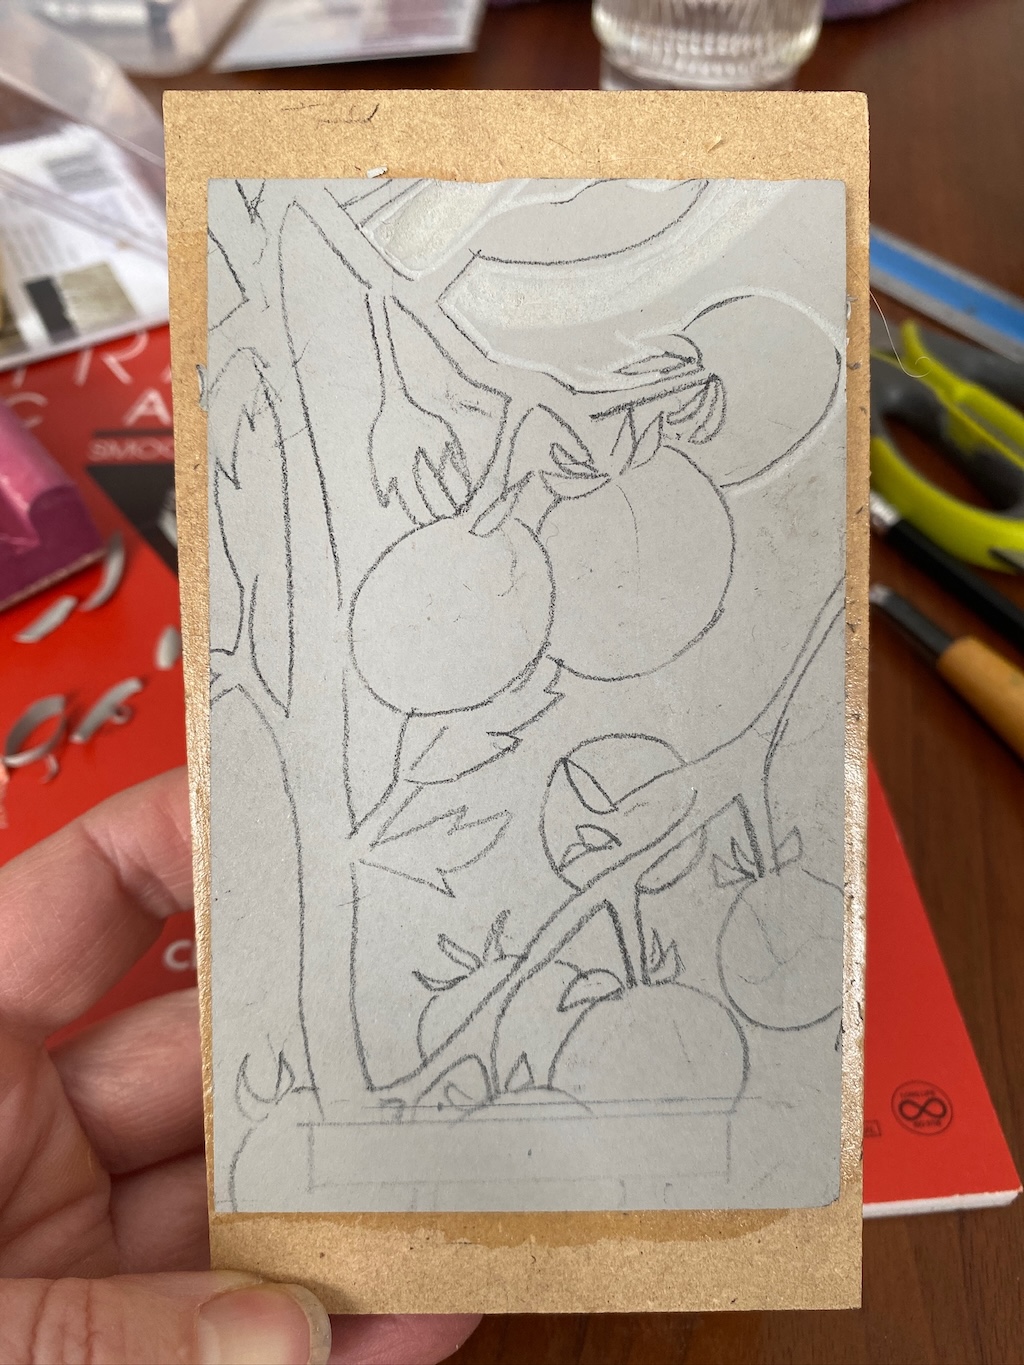 Mounted piece of linoleum, with a pencil sketch of tomatoes.